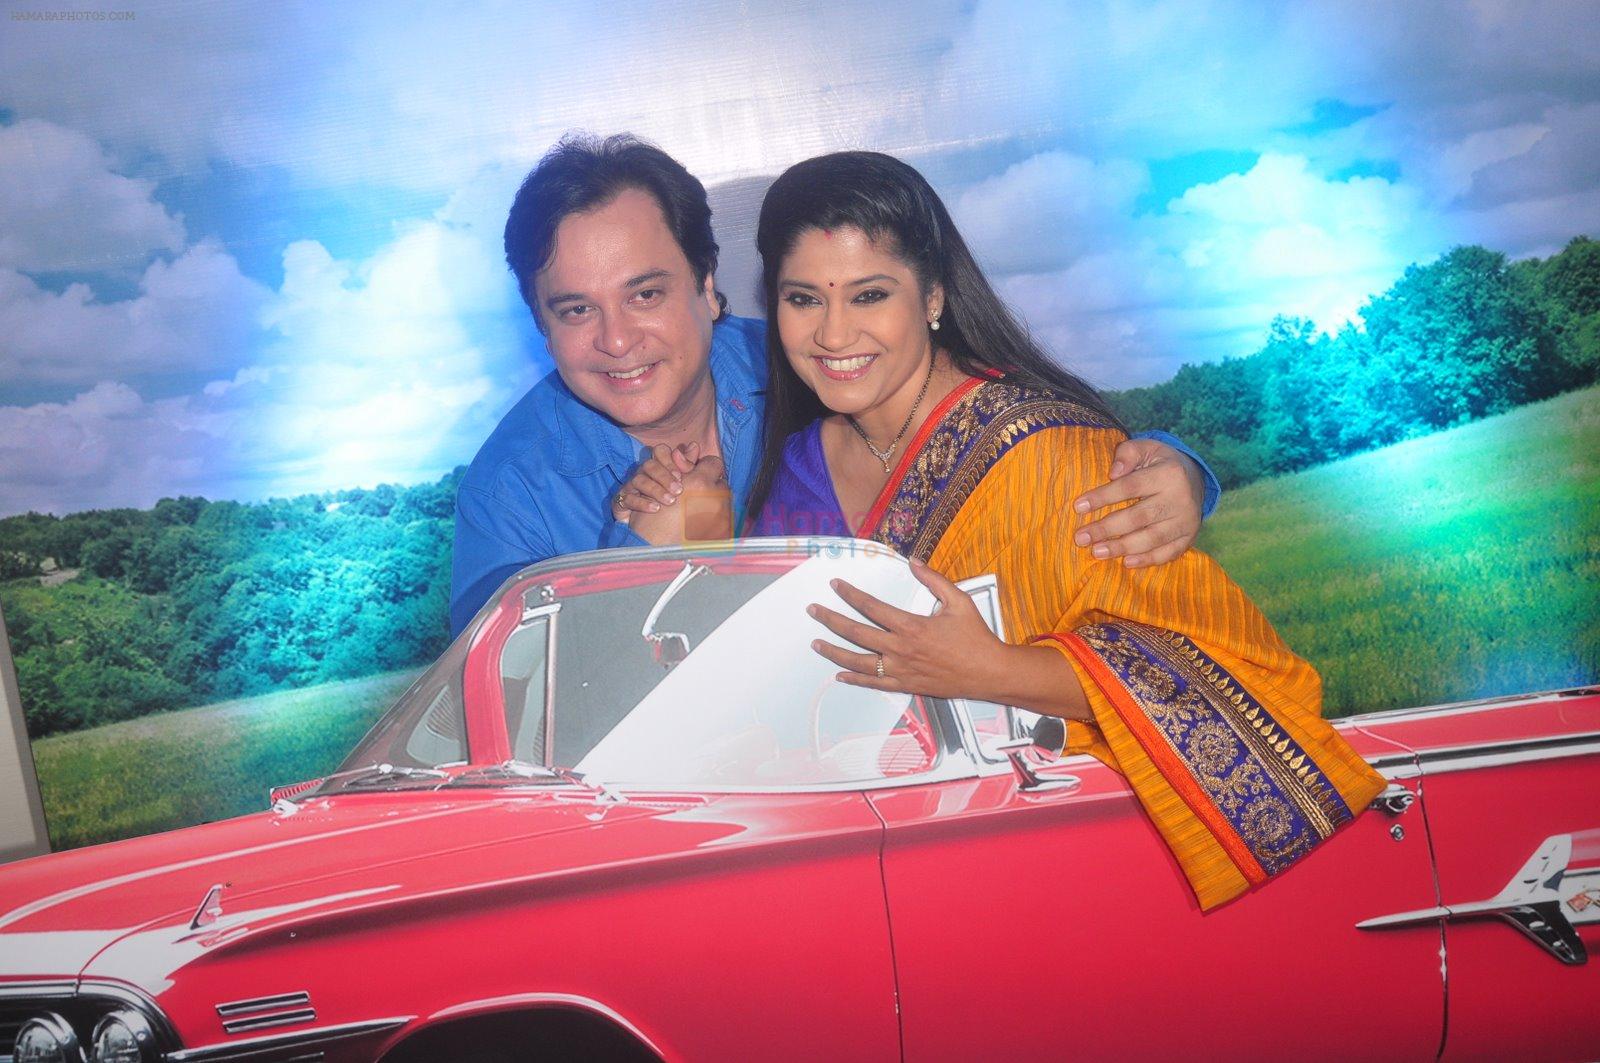 Renuka Shahane, Mahesh Thakur at Disney launches new shows and poitined as family channel in Courtyard Marriott, Mumbai on 22nd Jan 2015